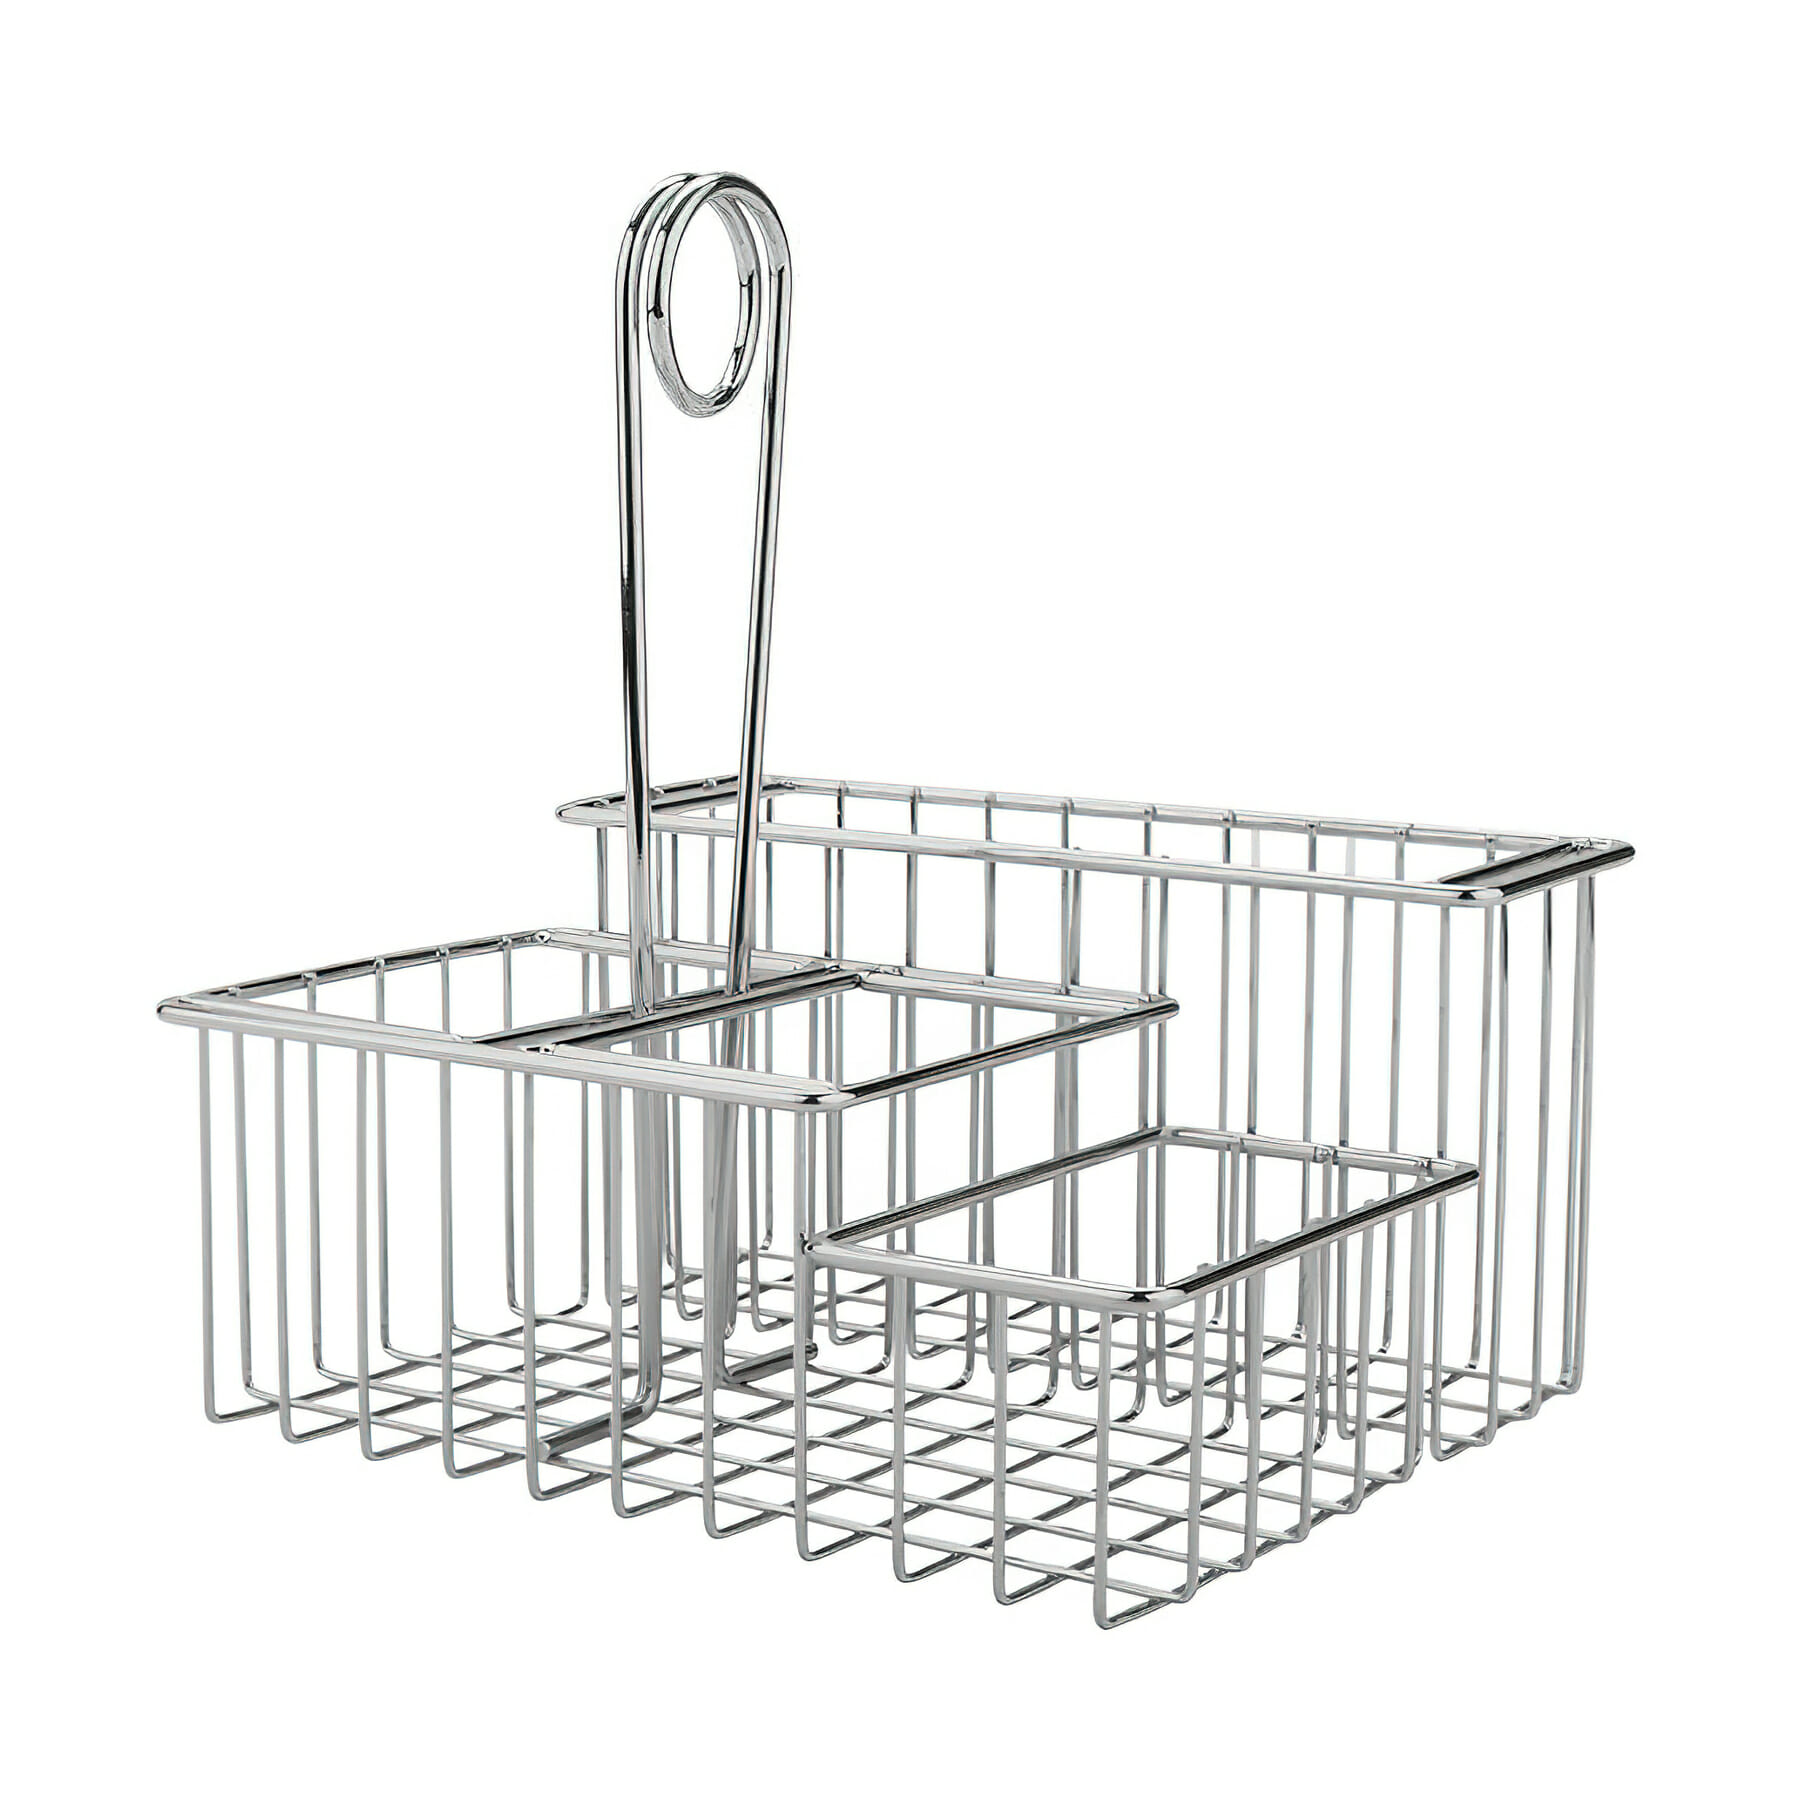 G.E.T. 4-21699 Metal 4-Compartment Caddy